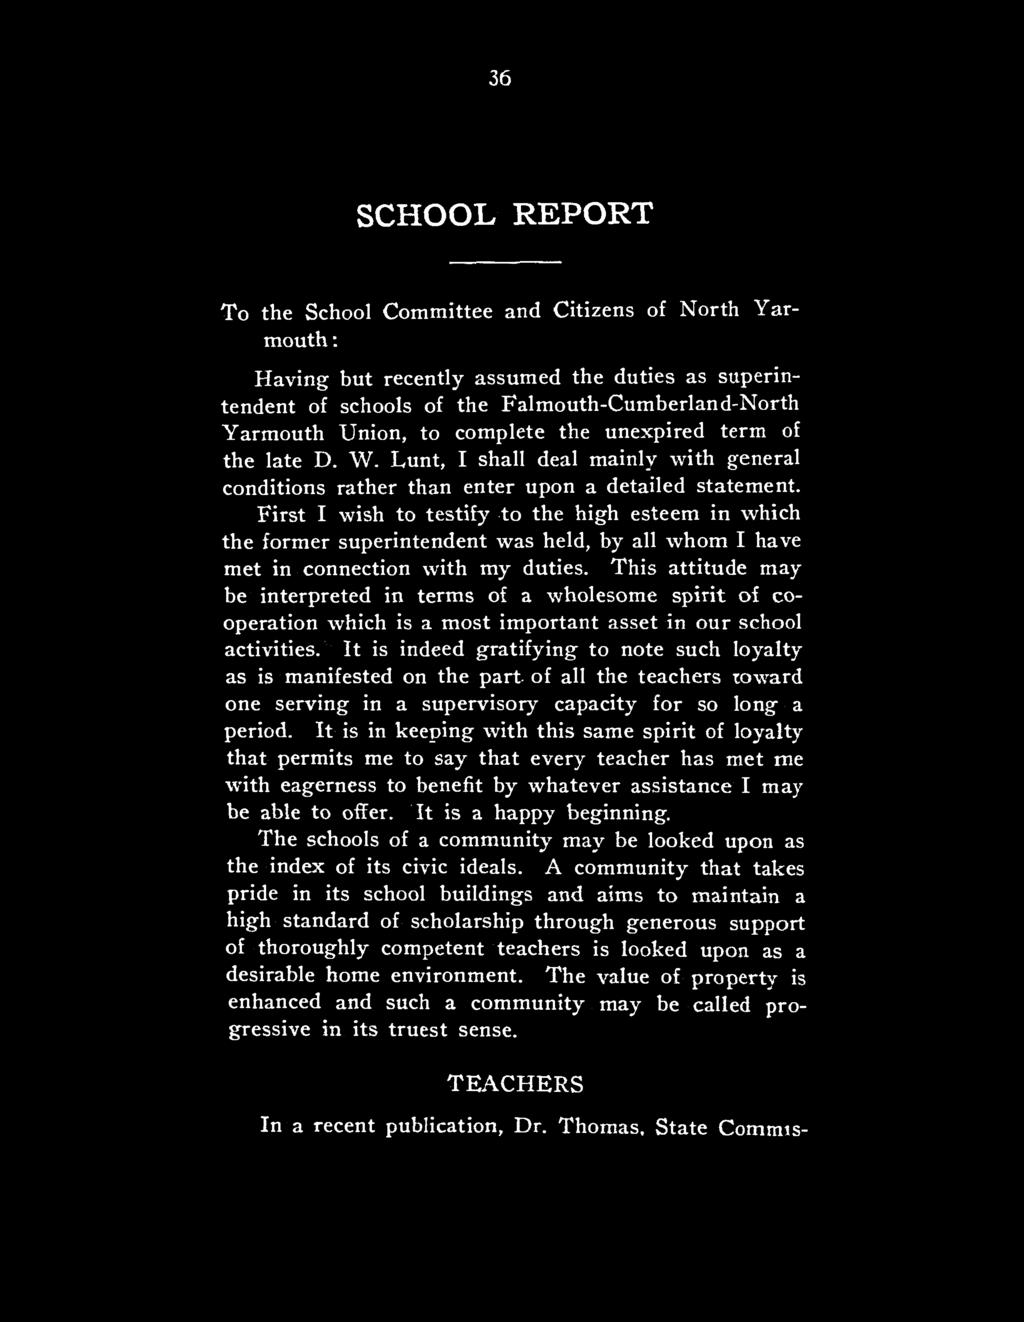 36 SCHOOL REPORT To the School Committee and Citizens of North Yarmouth : Having but recently assumed the duties as superintendent of schools of the Falmouth-Cumberland-North Yarmouth Union, to